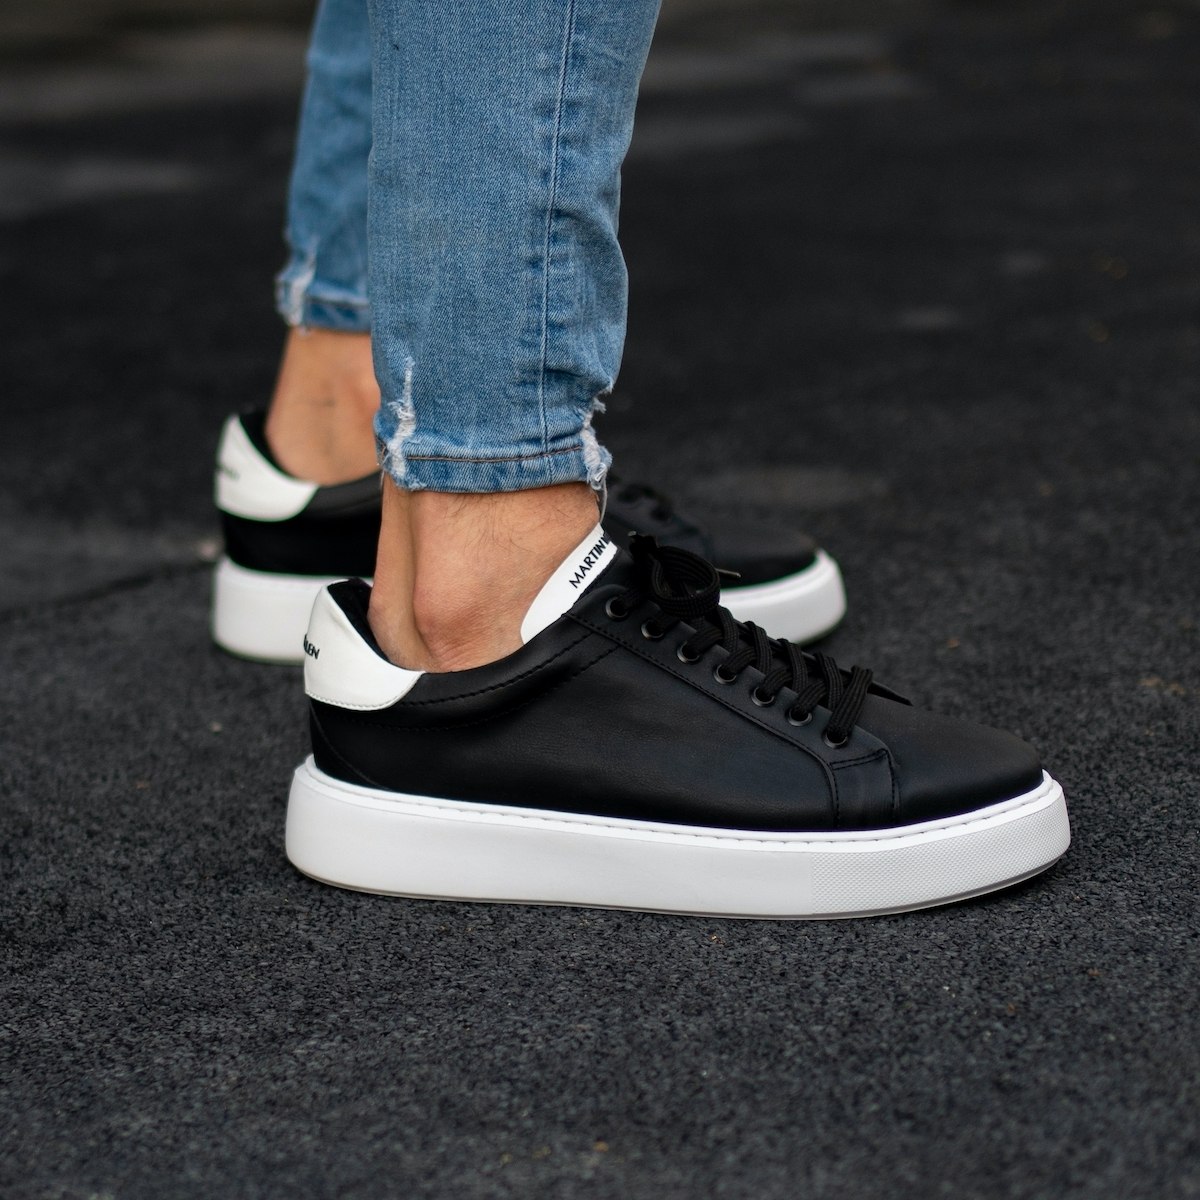 Stylish Casual Comfortable Black White Shoes For Men